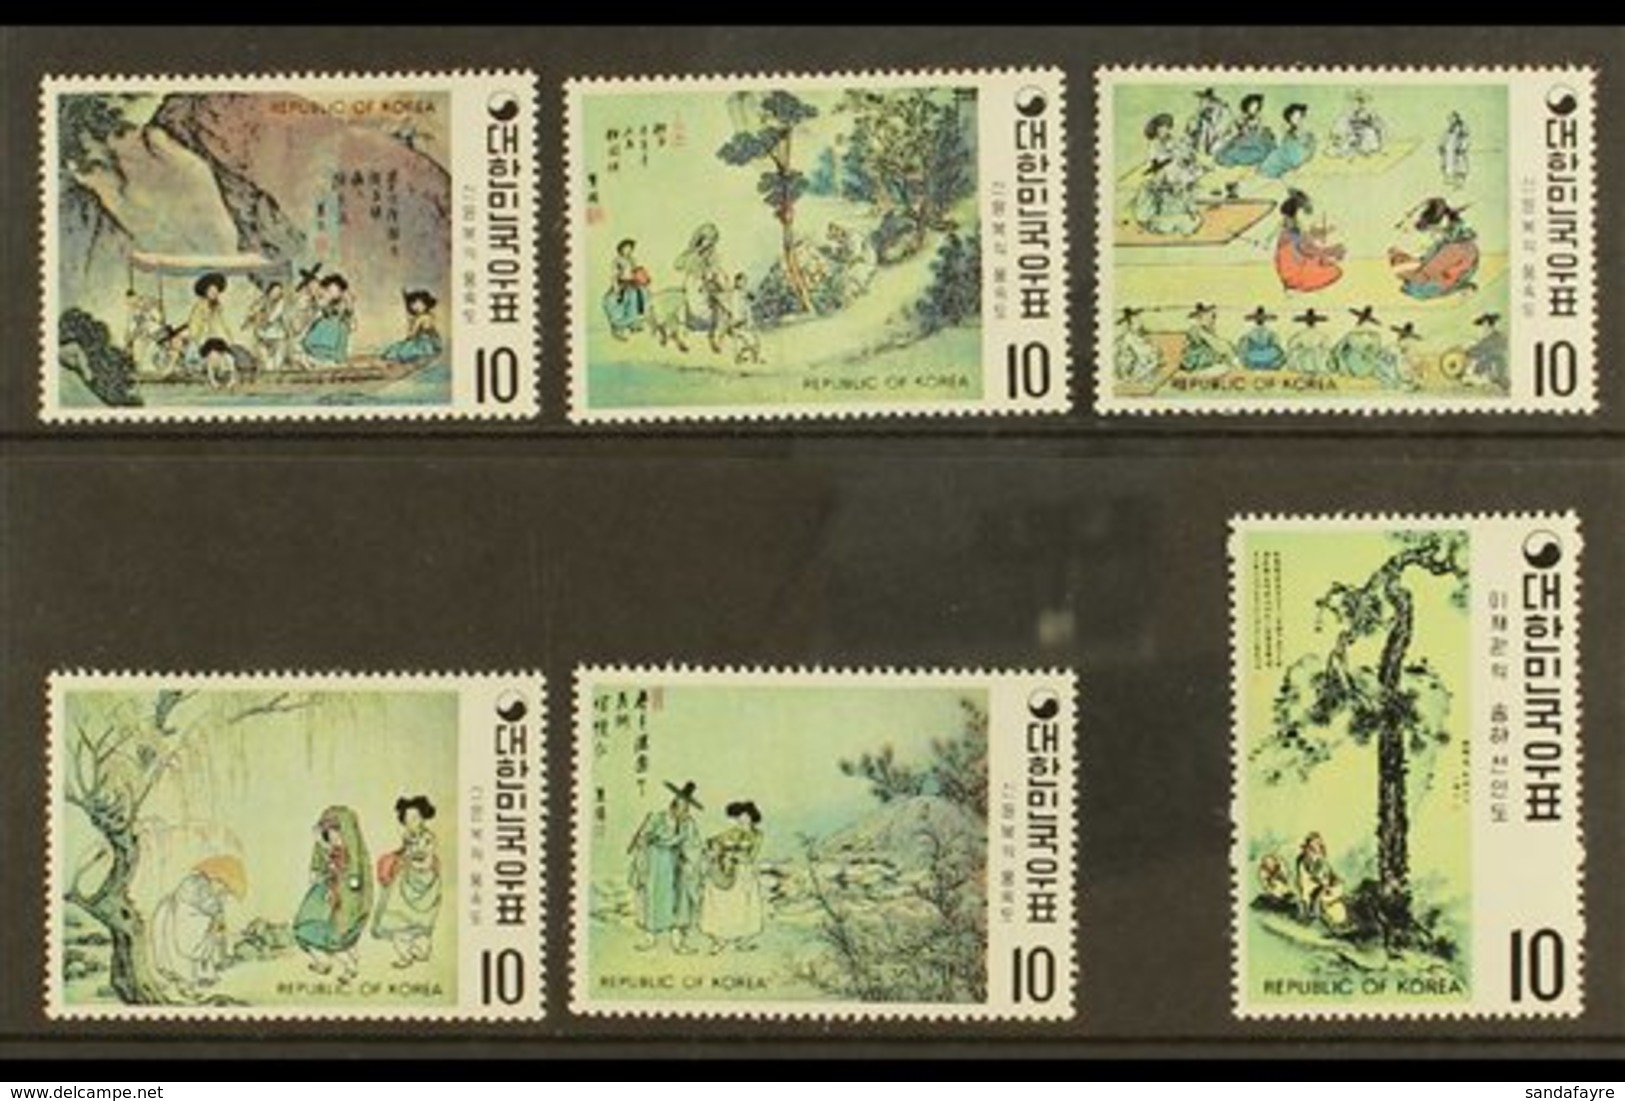 1971 Painting Fourth Series Complete Set & All Mini-sheets, SG 947/52 & MS 953, Fine Never Hinged Mint, Fresh. (6 Stamps - Corée Du Sud